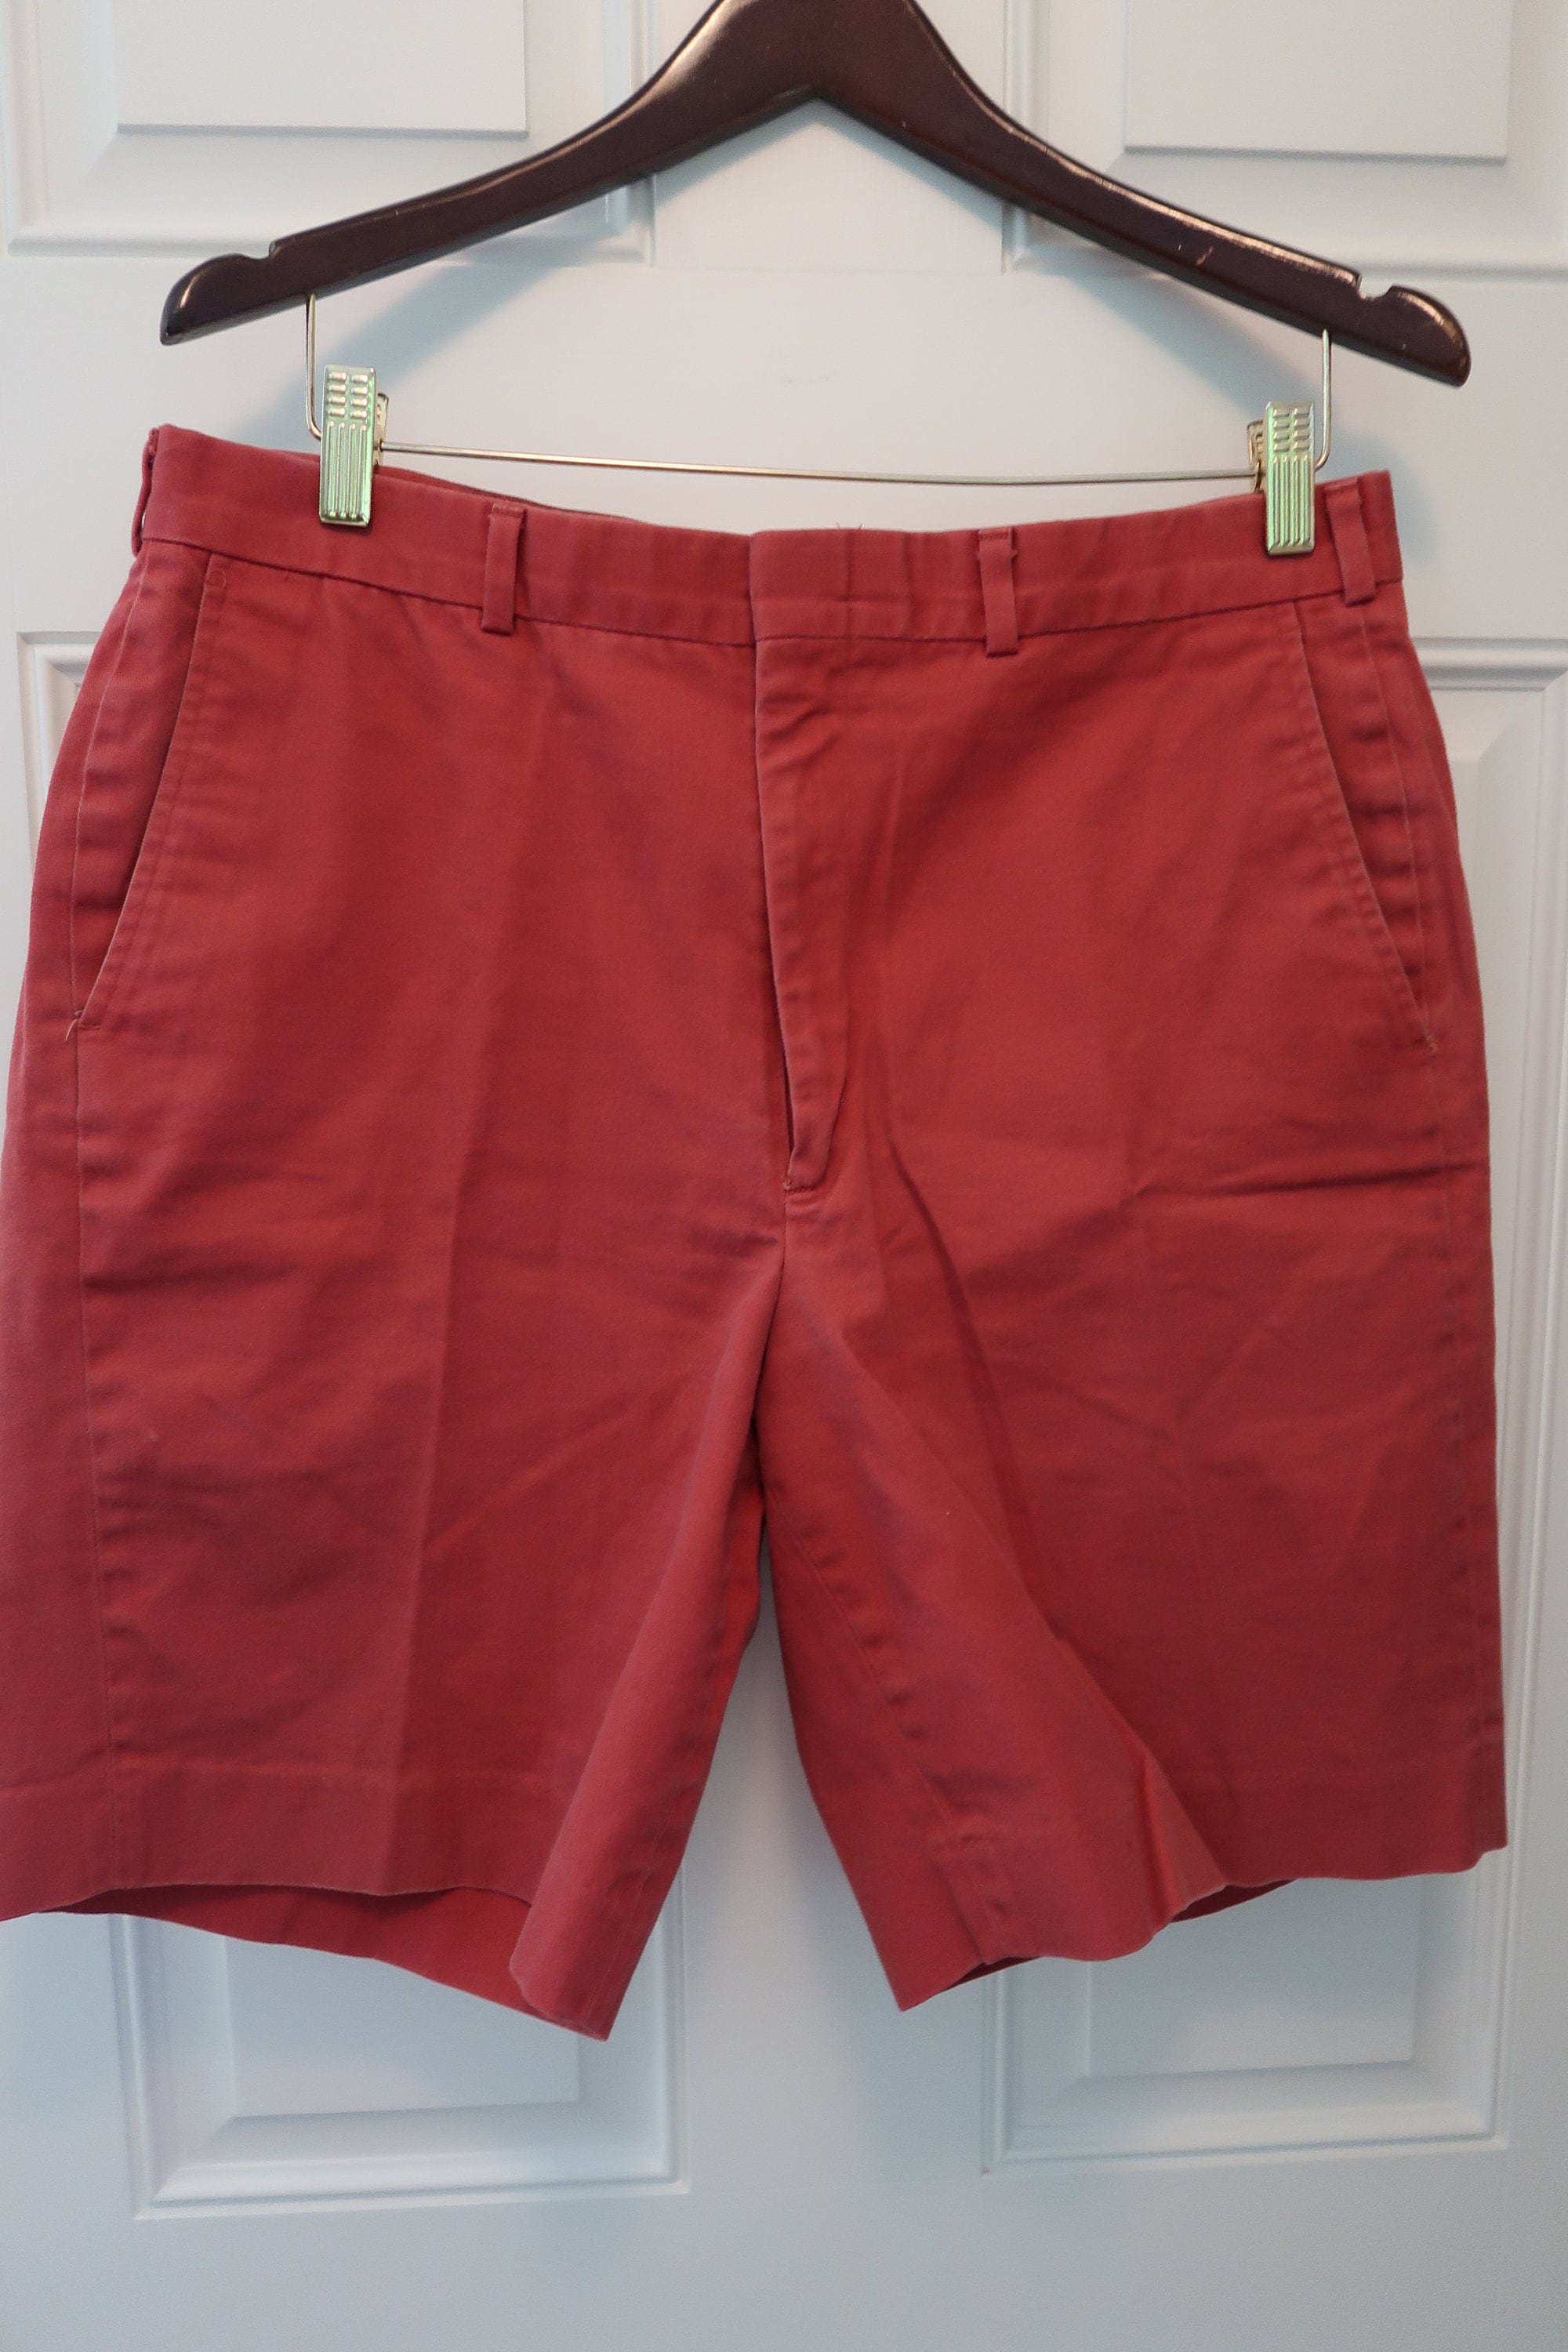 At adskille Vugge Guggenheim Museum Vintage NANTUCKET RED SHORTS Size 32 From Murray's Toggery - Etsy